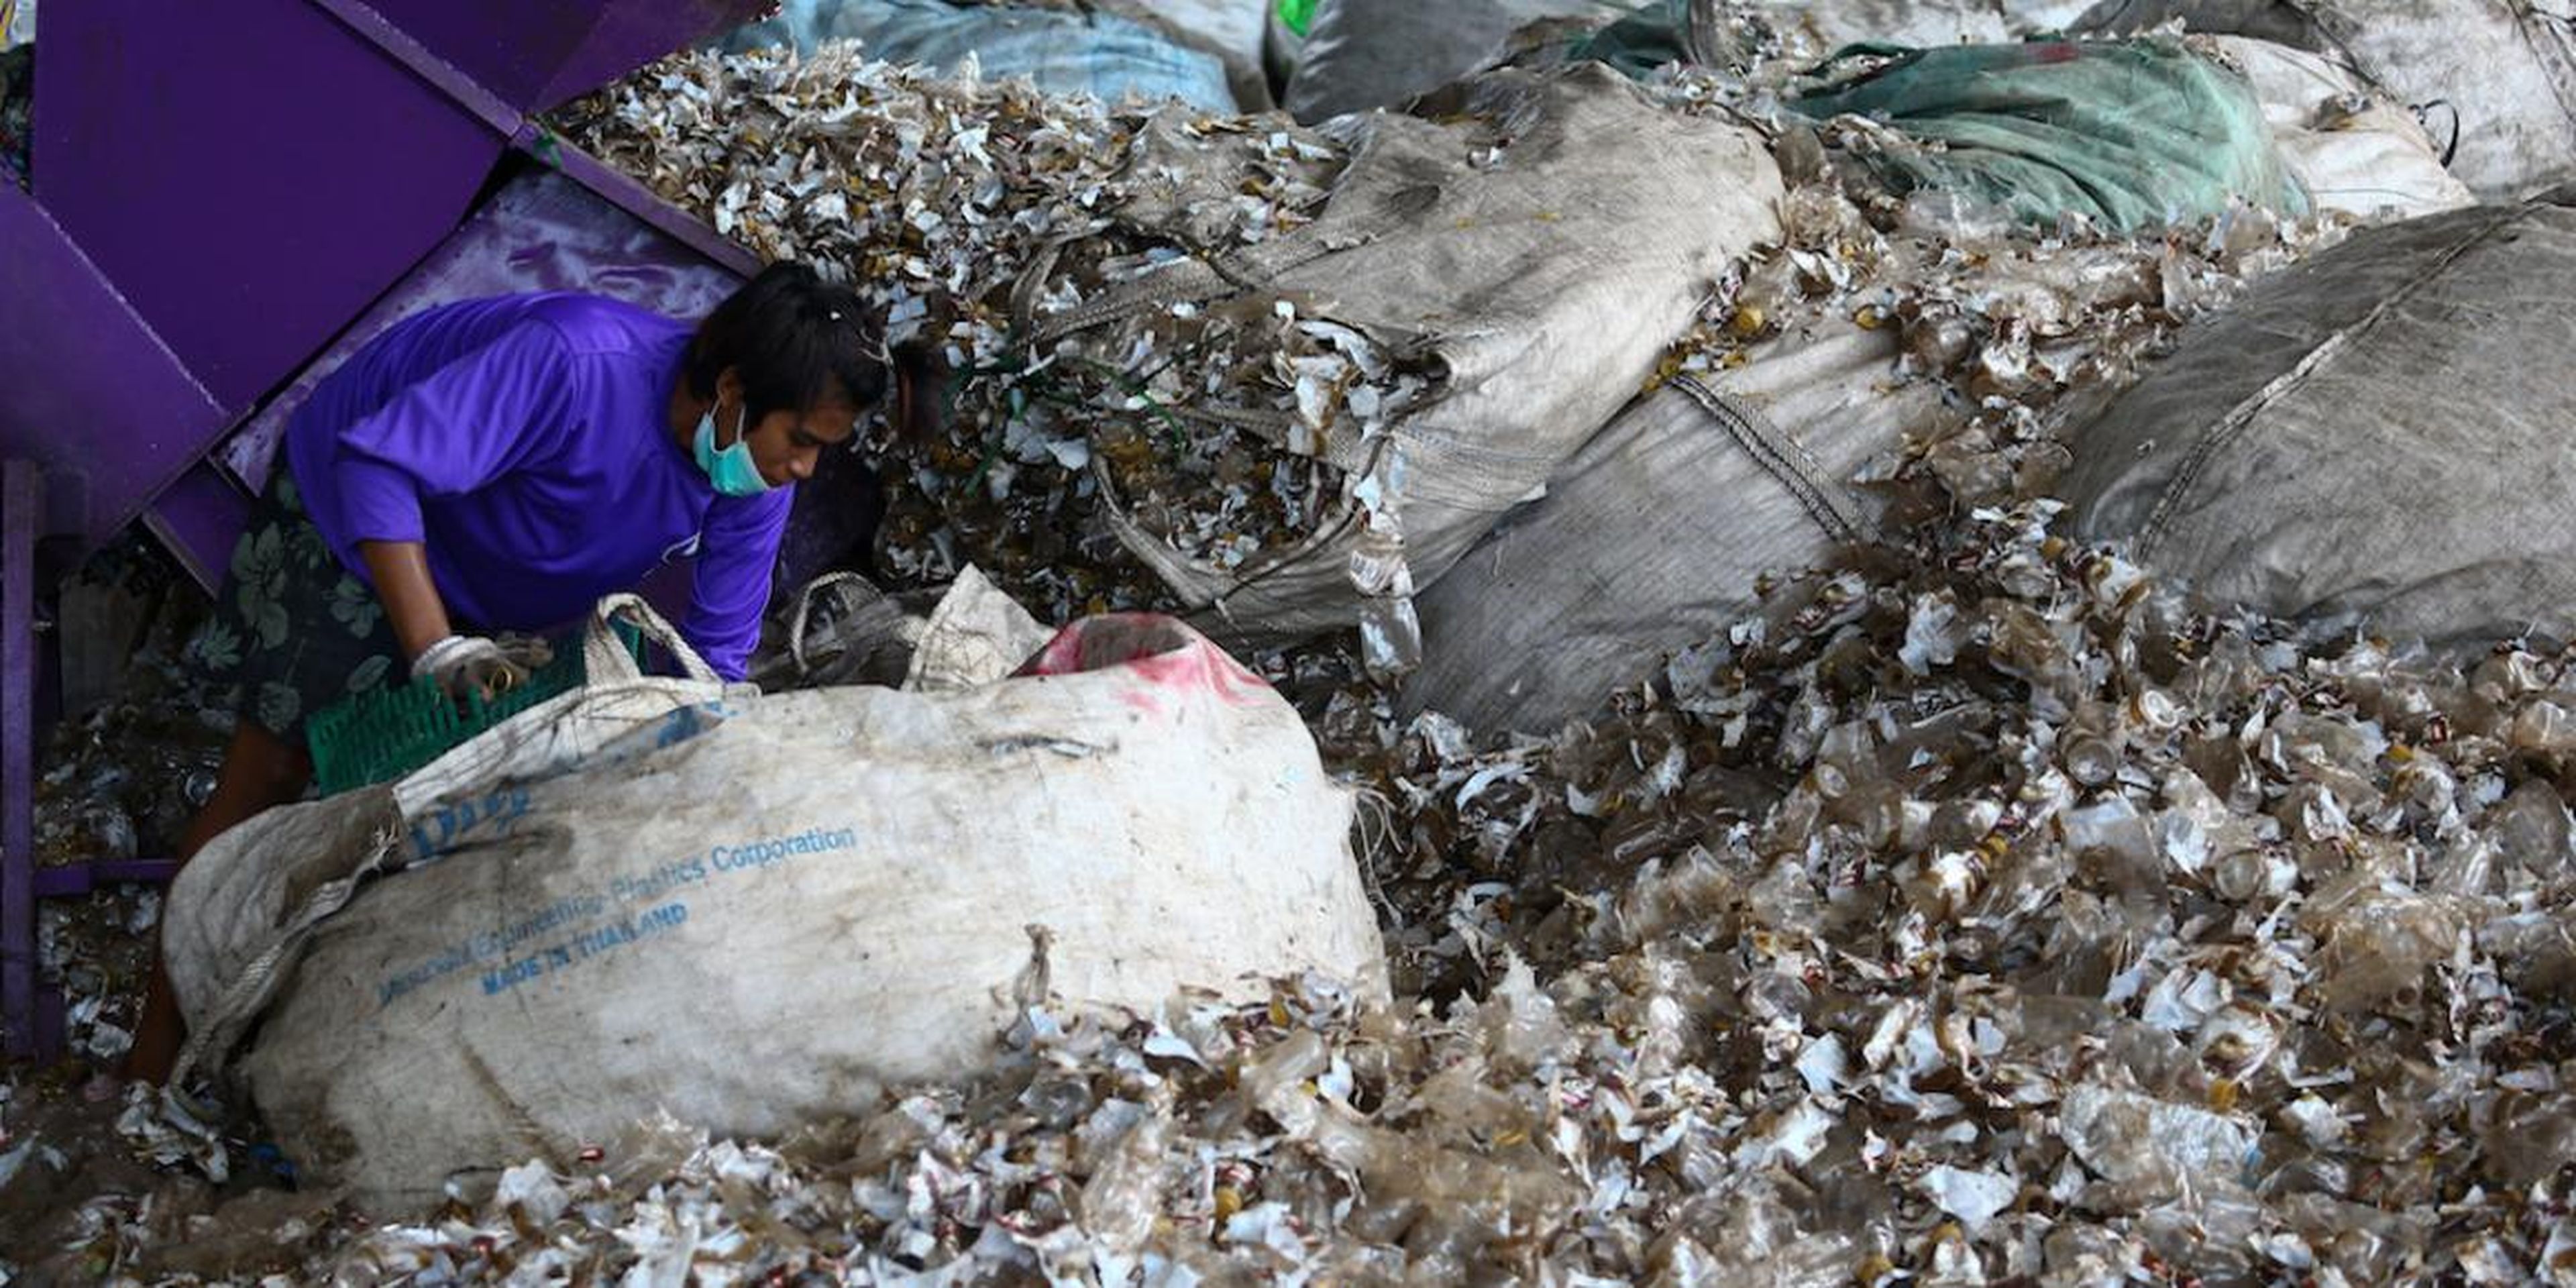 A worker sorting recyclable plastic waste at the Prabkaya Recycle Factory in Pathum Thani outside Bangkok in June 2017.